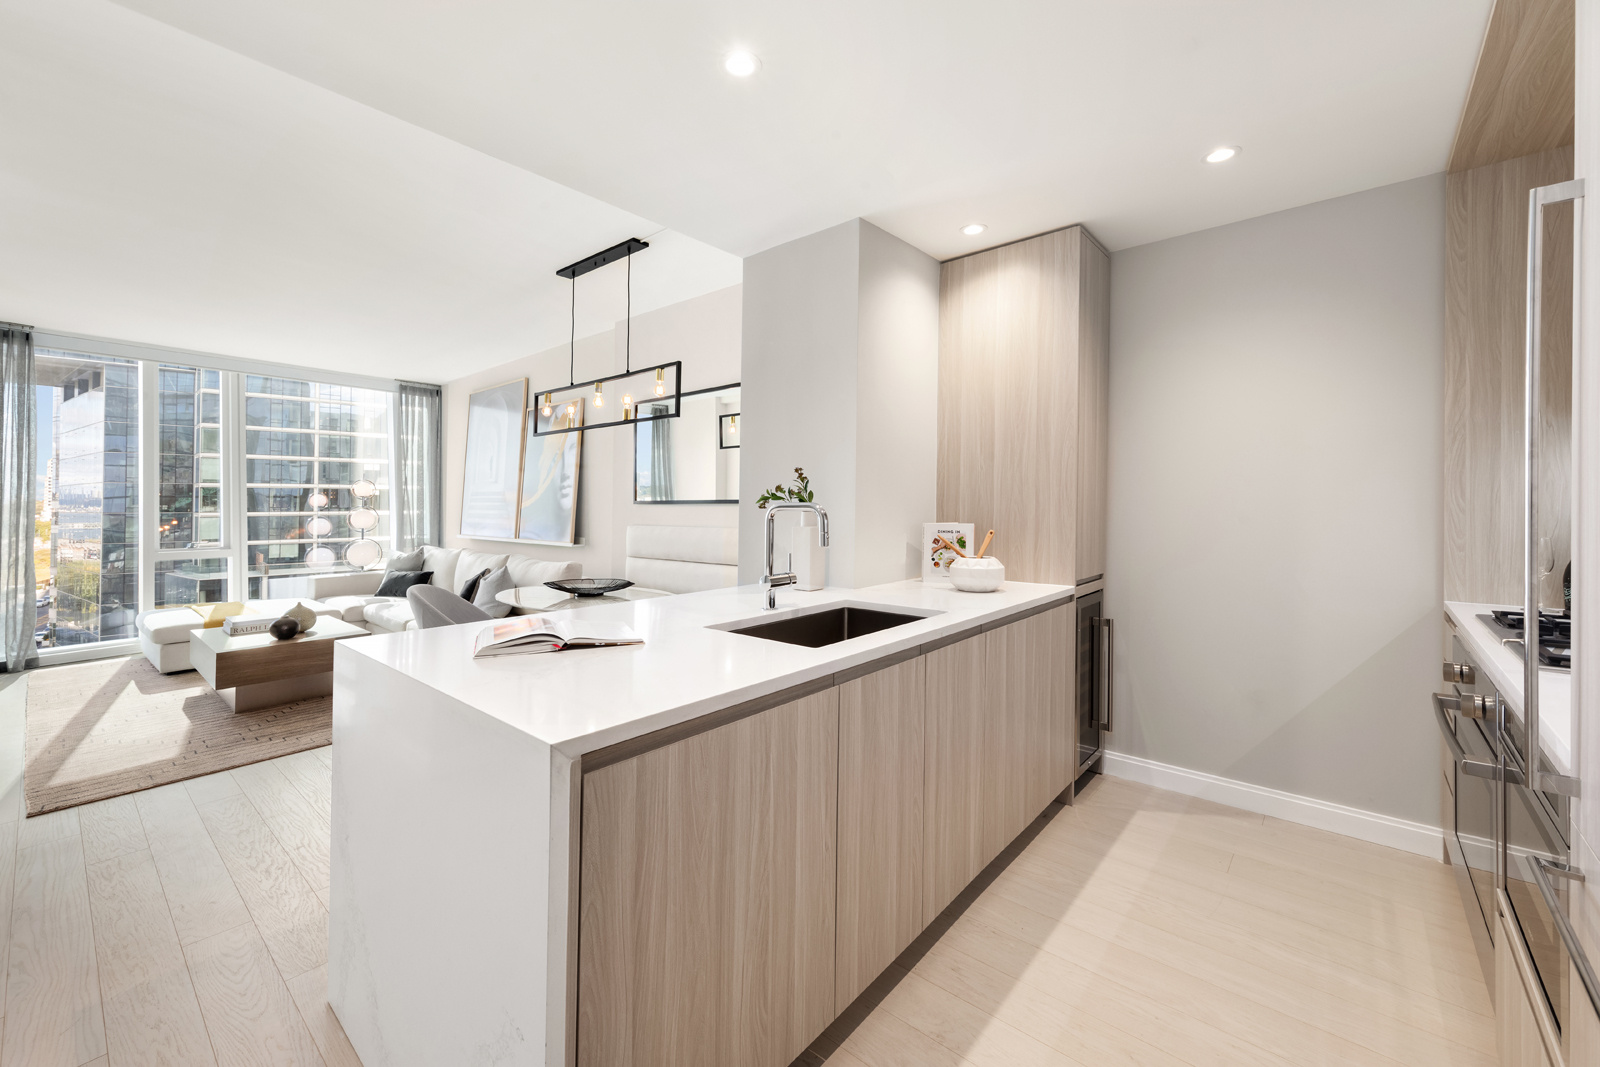 Modern and spacious kitchen with light wood cabinets and countertops, featuring a large island with a sink and a bright living room area in the background, complemented by large windows offering a view of the cityscape.